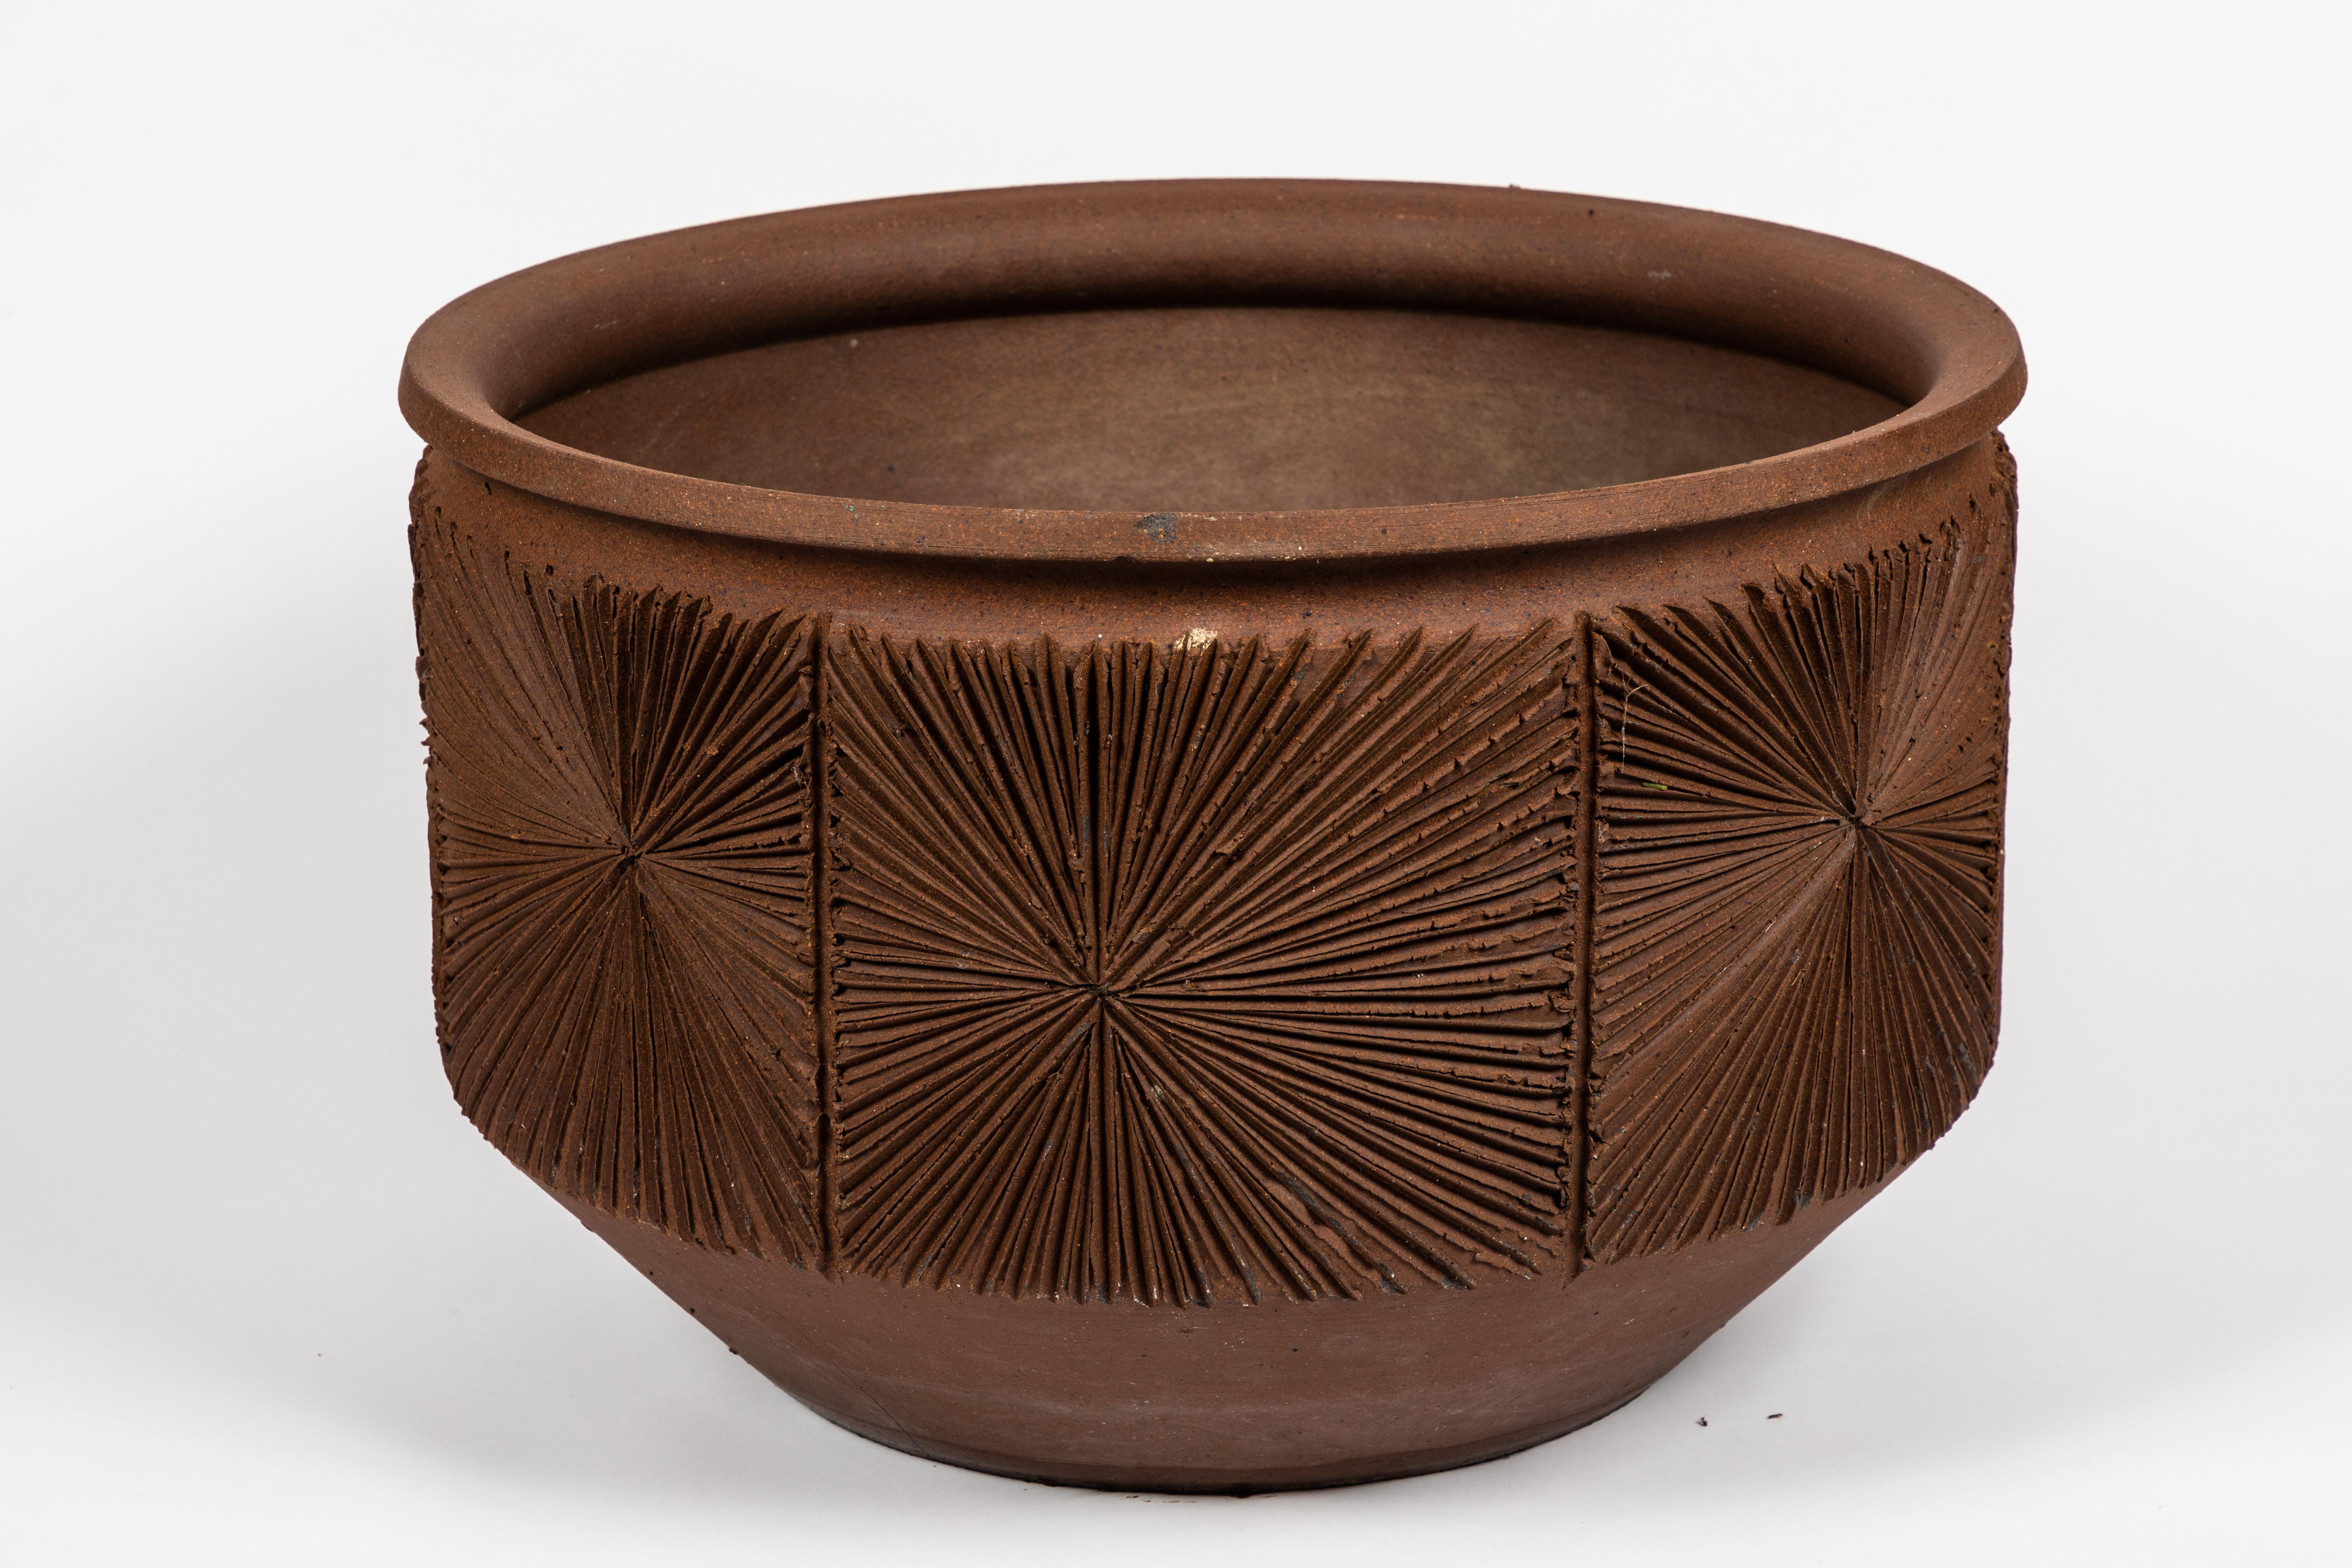 Monumental Robert Maxwell & David Cressey sunburst planter for Earthgender. 

Studio executed in hand etched textured earthenware. A very clean and incredibly rare monumental example from the short-lived and increasingly coveted design collective